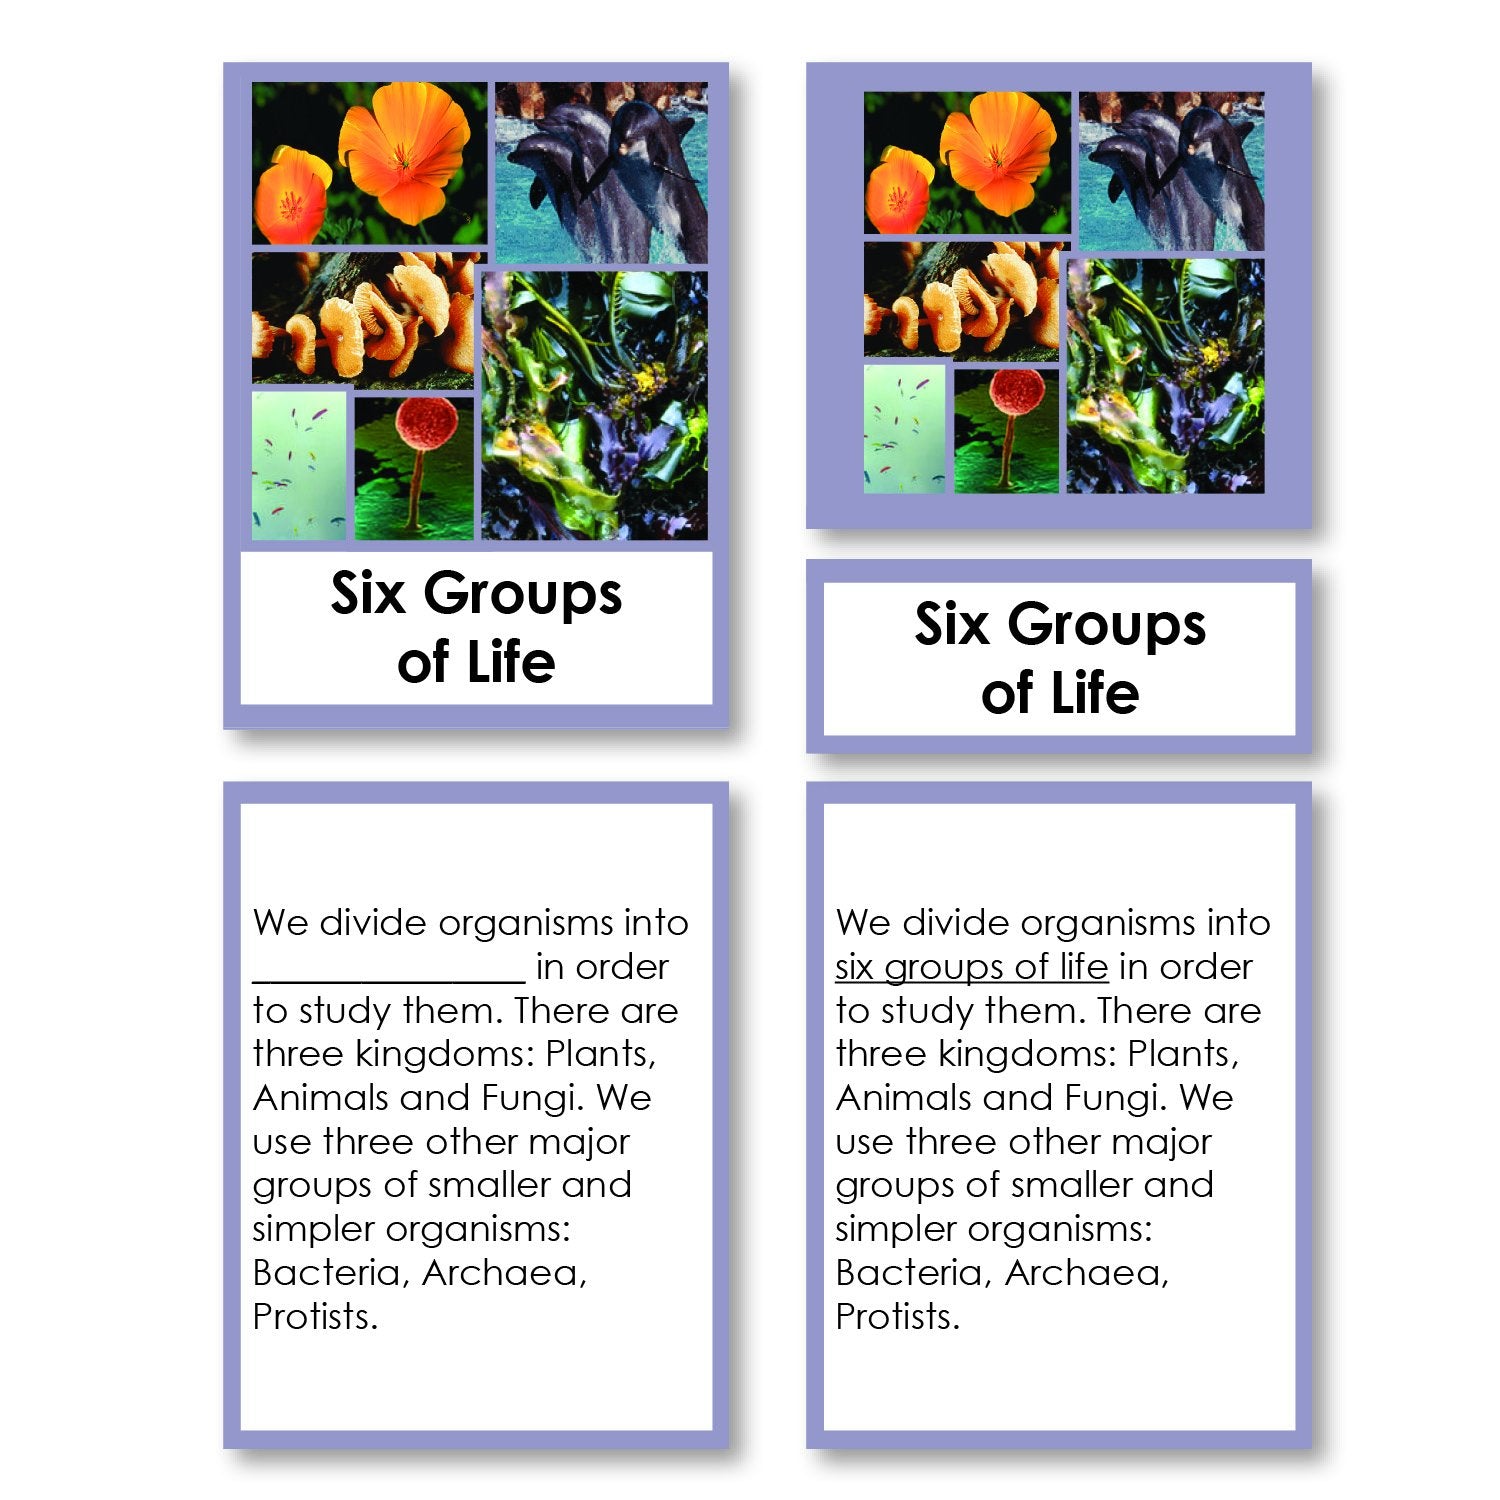 Zoology-Animal Classification/ Identification - Six Groups Of Life (kingdoms) Classification 3-Part Cards With Definitions